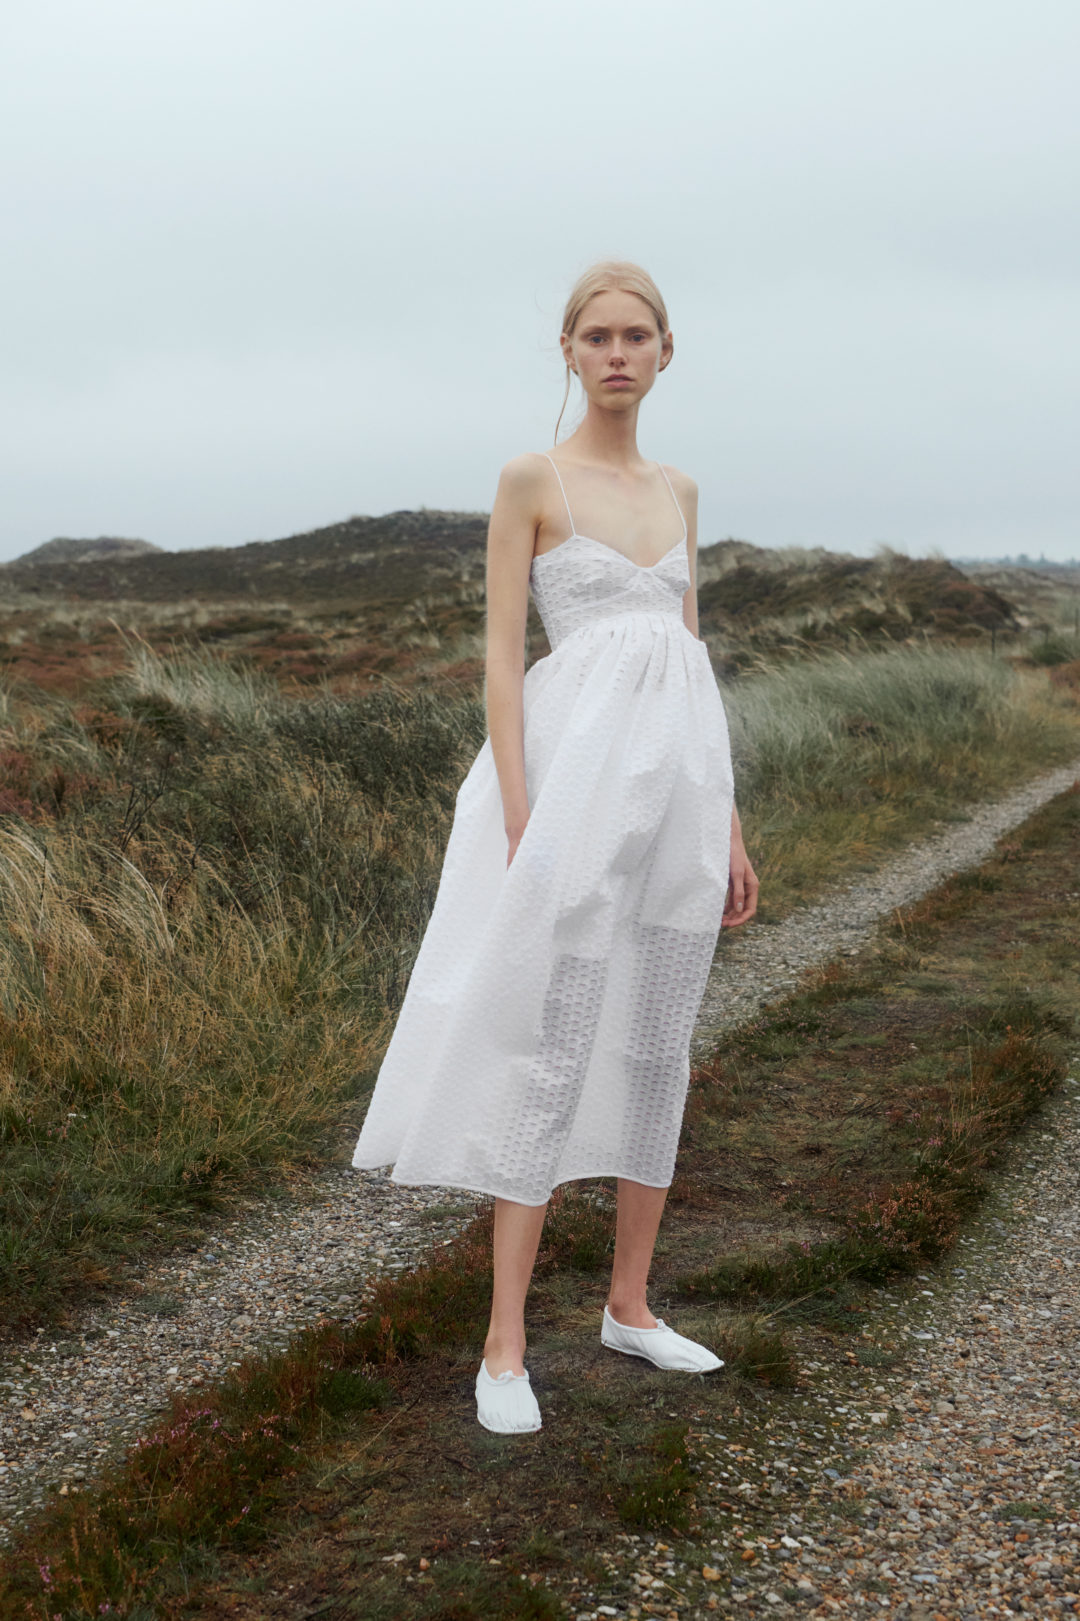 Cecilie Bahnsen Makes Her Paris Fashion Week Debut With Eco